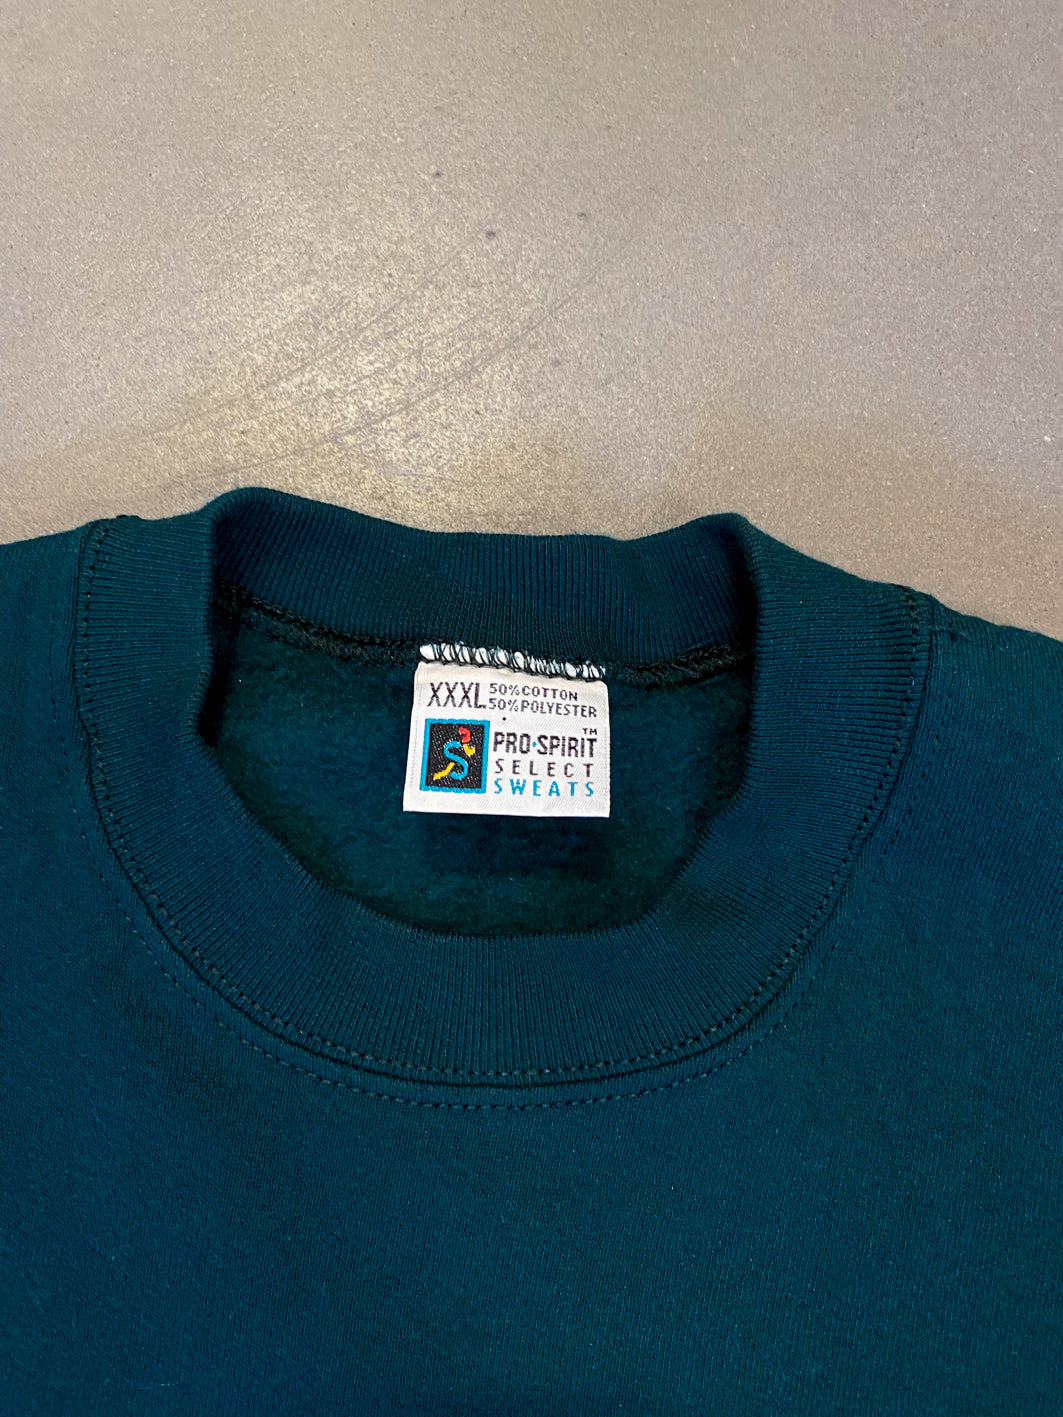 Reworked Pro Spirit Sweatshirt in Green with Logo Embroidery